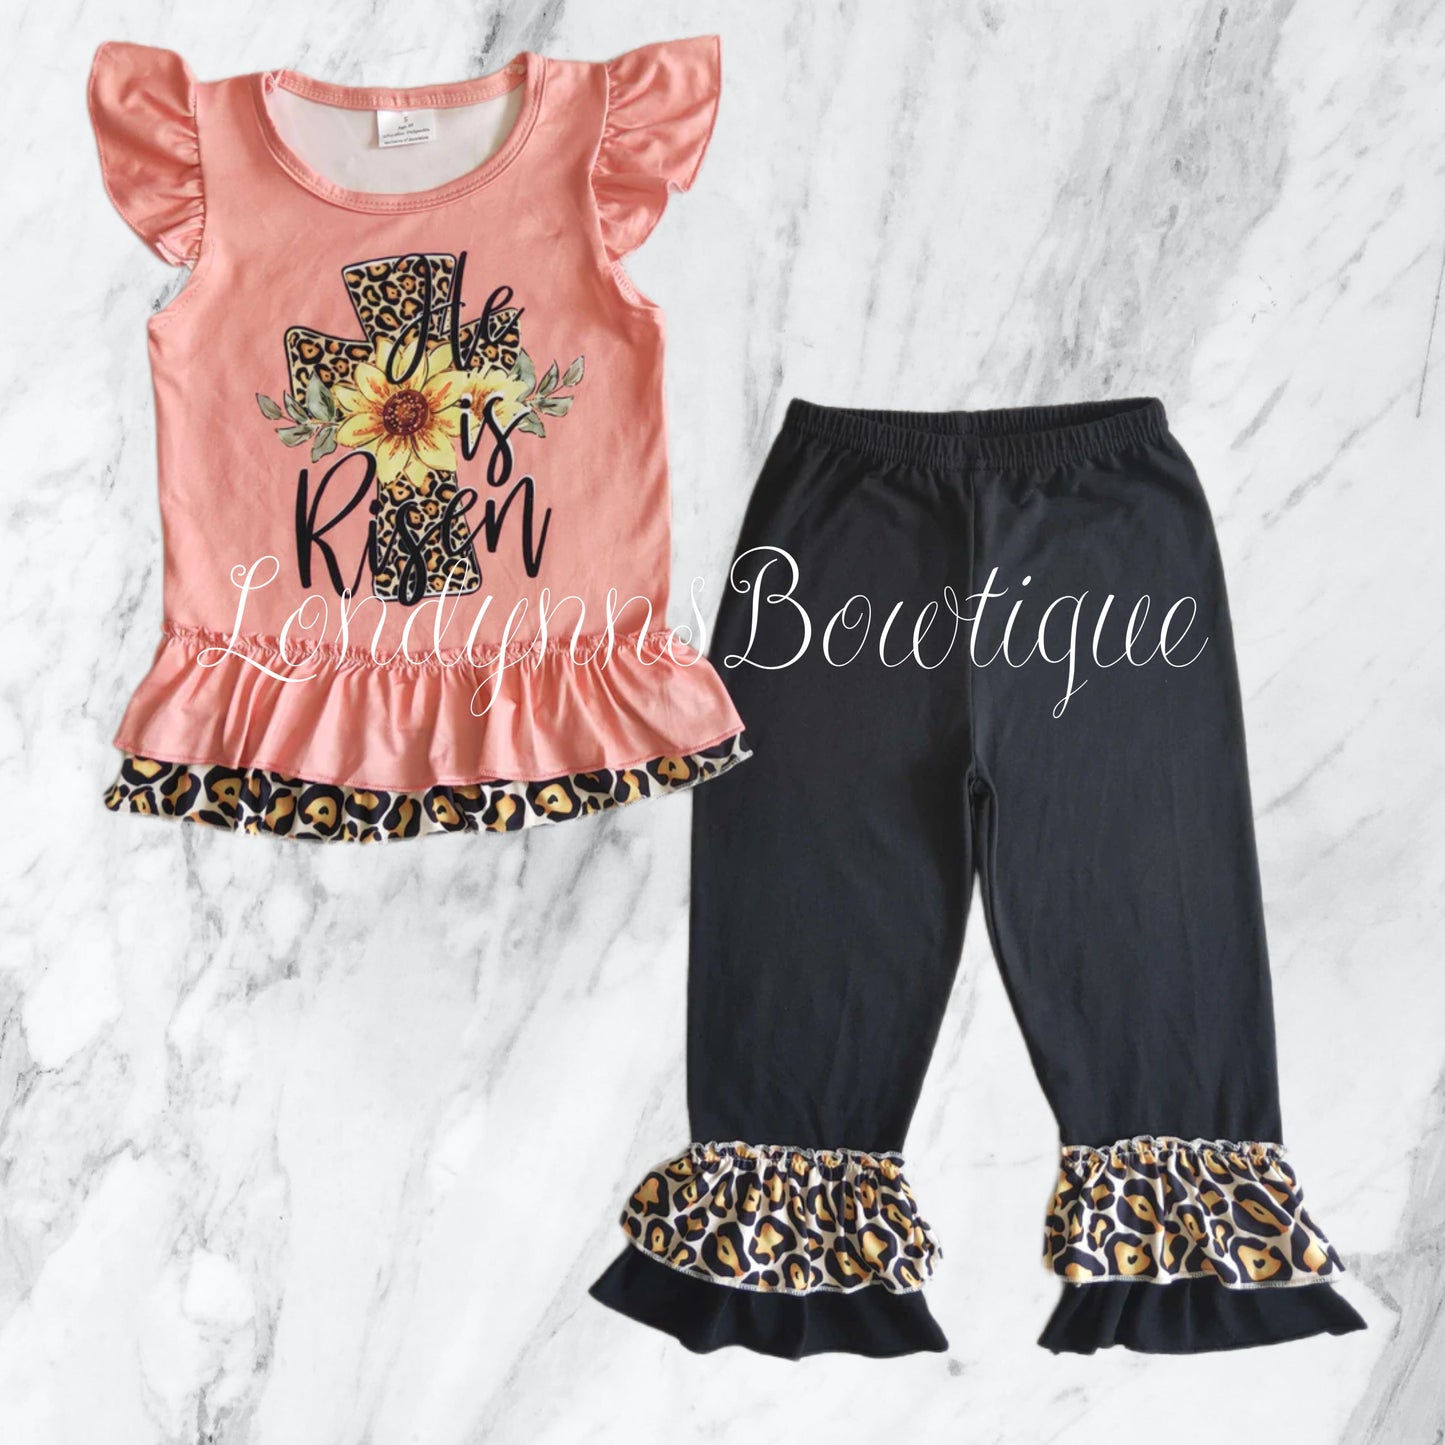 He is risen leopard outfit